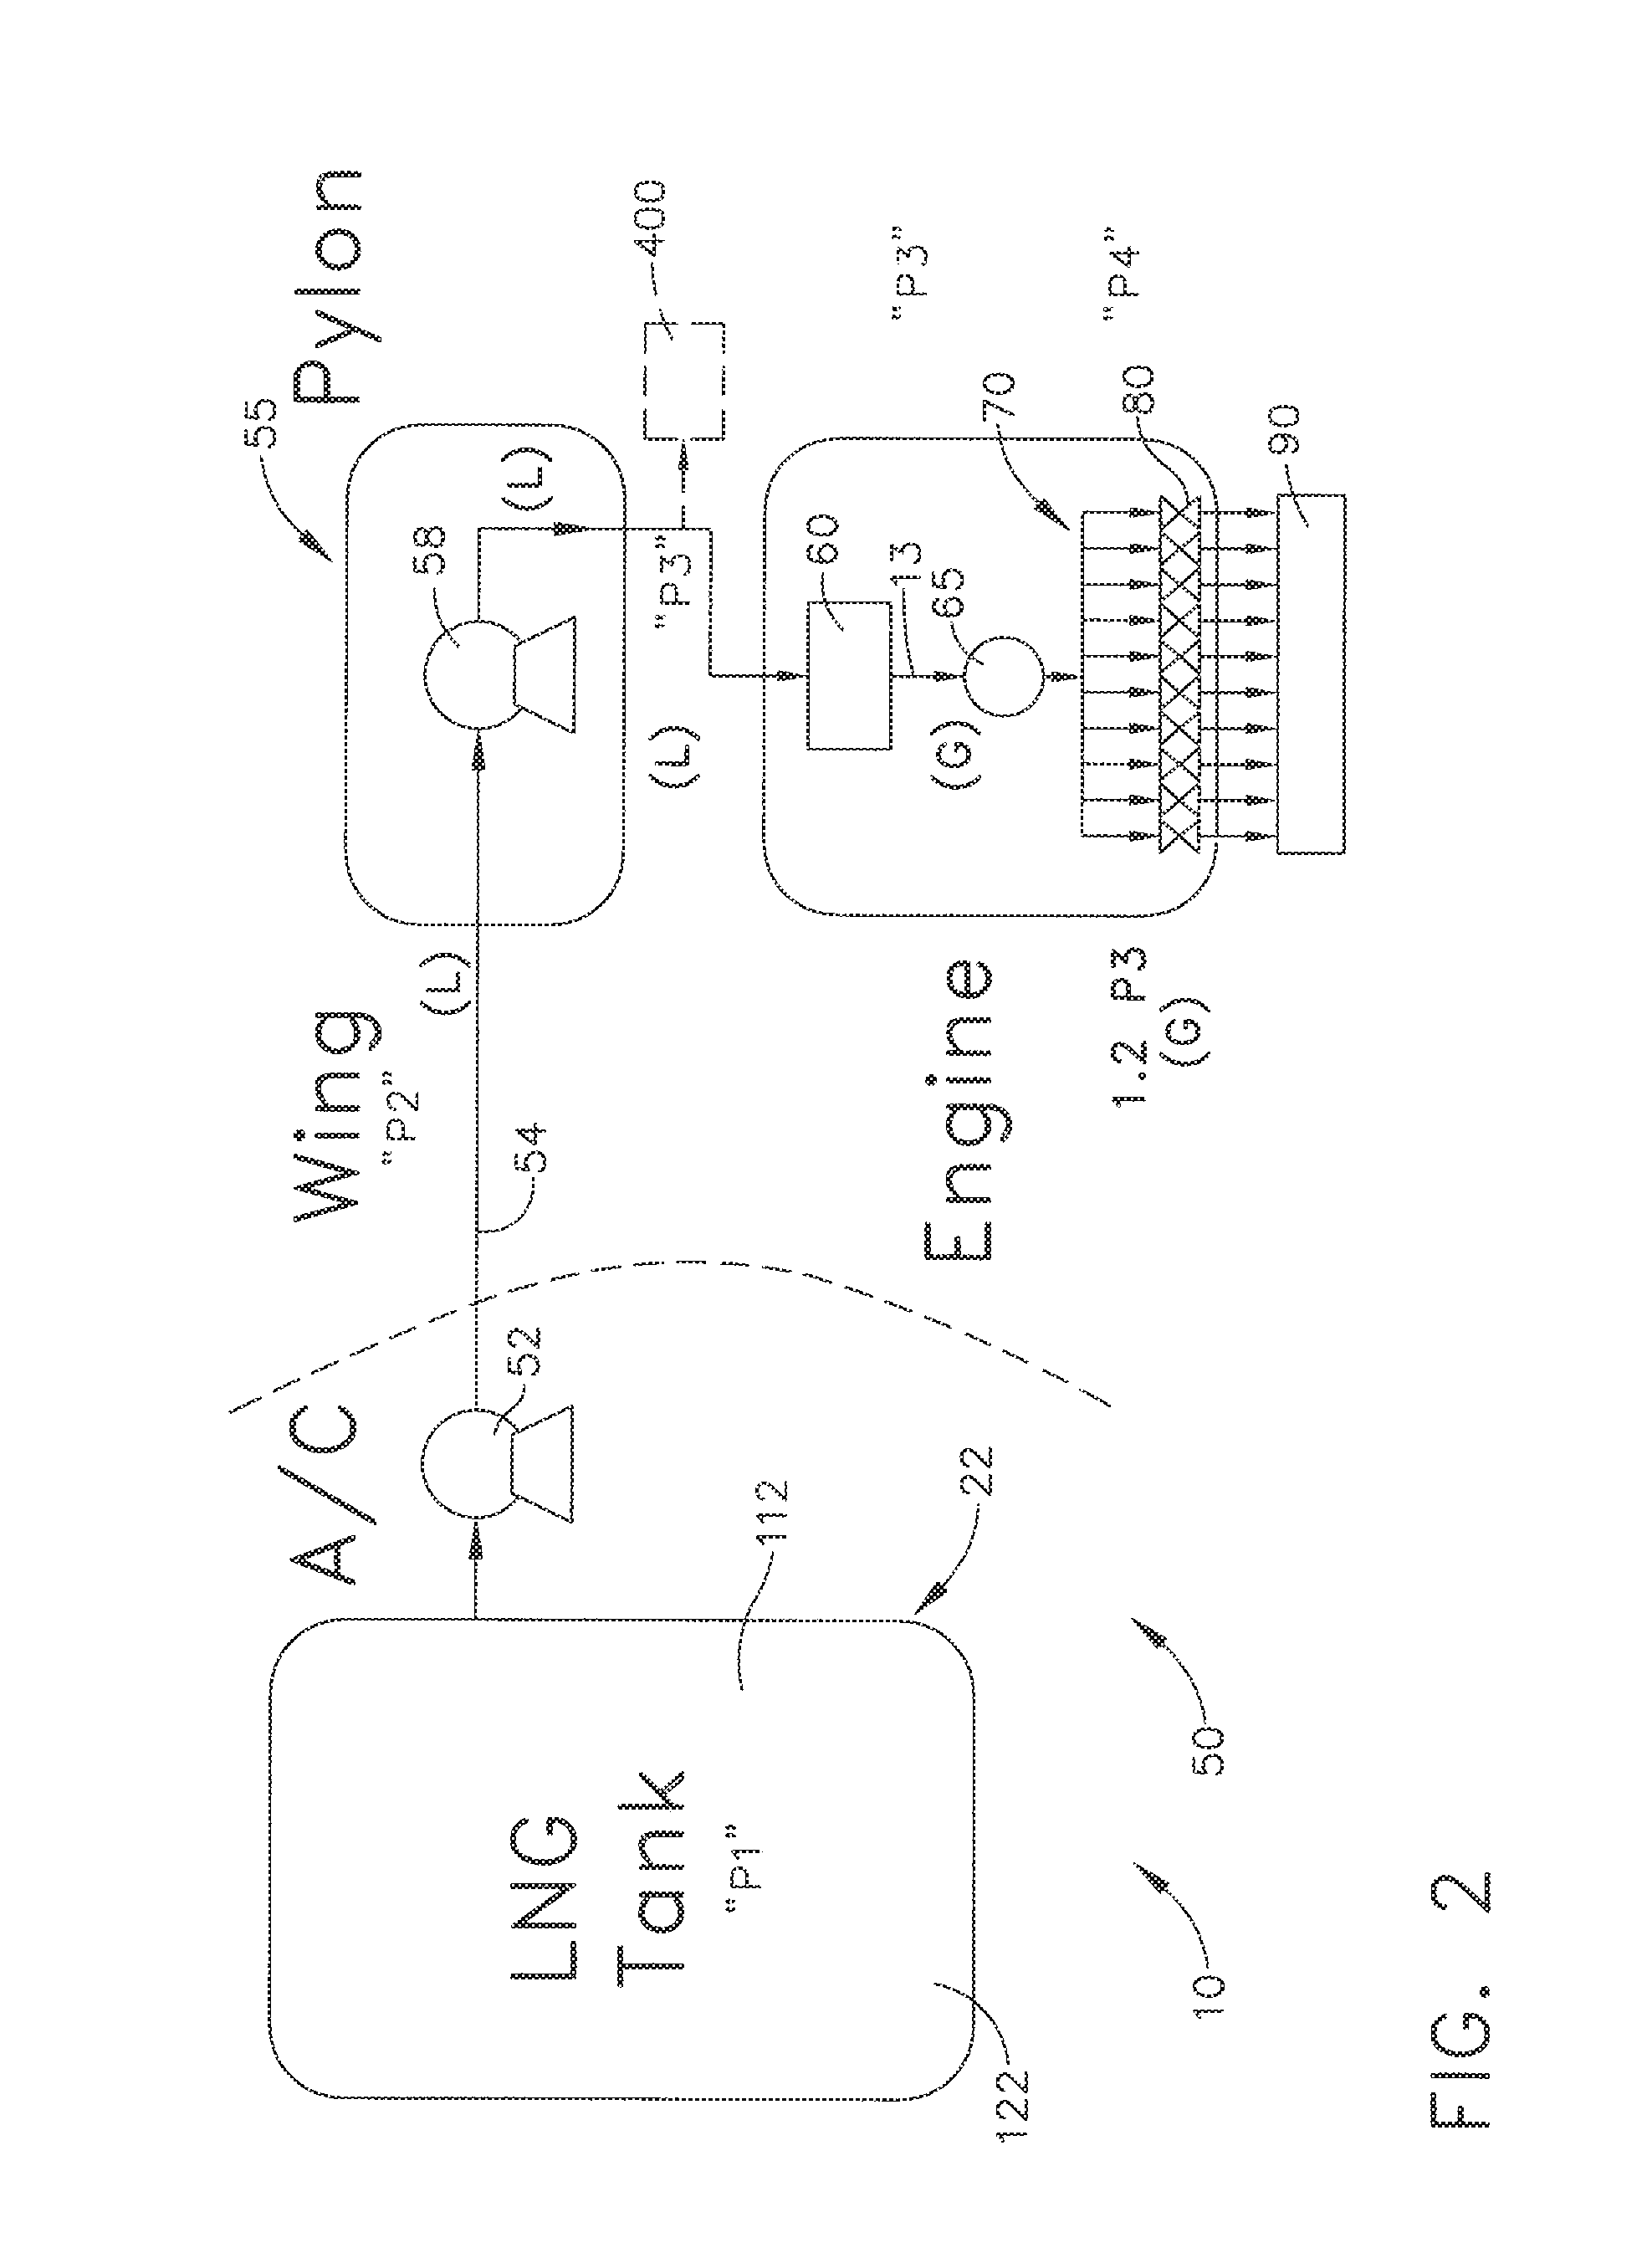 Dual fuel aircraft system and method for operating same